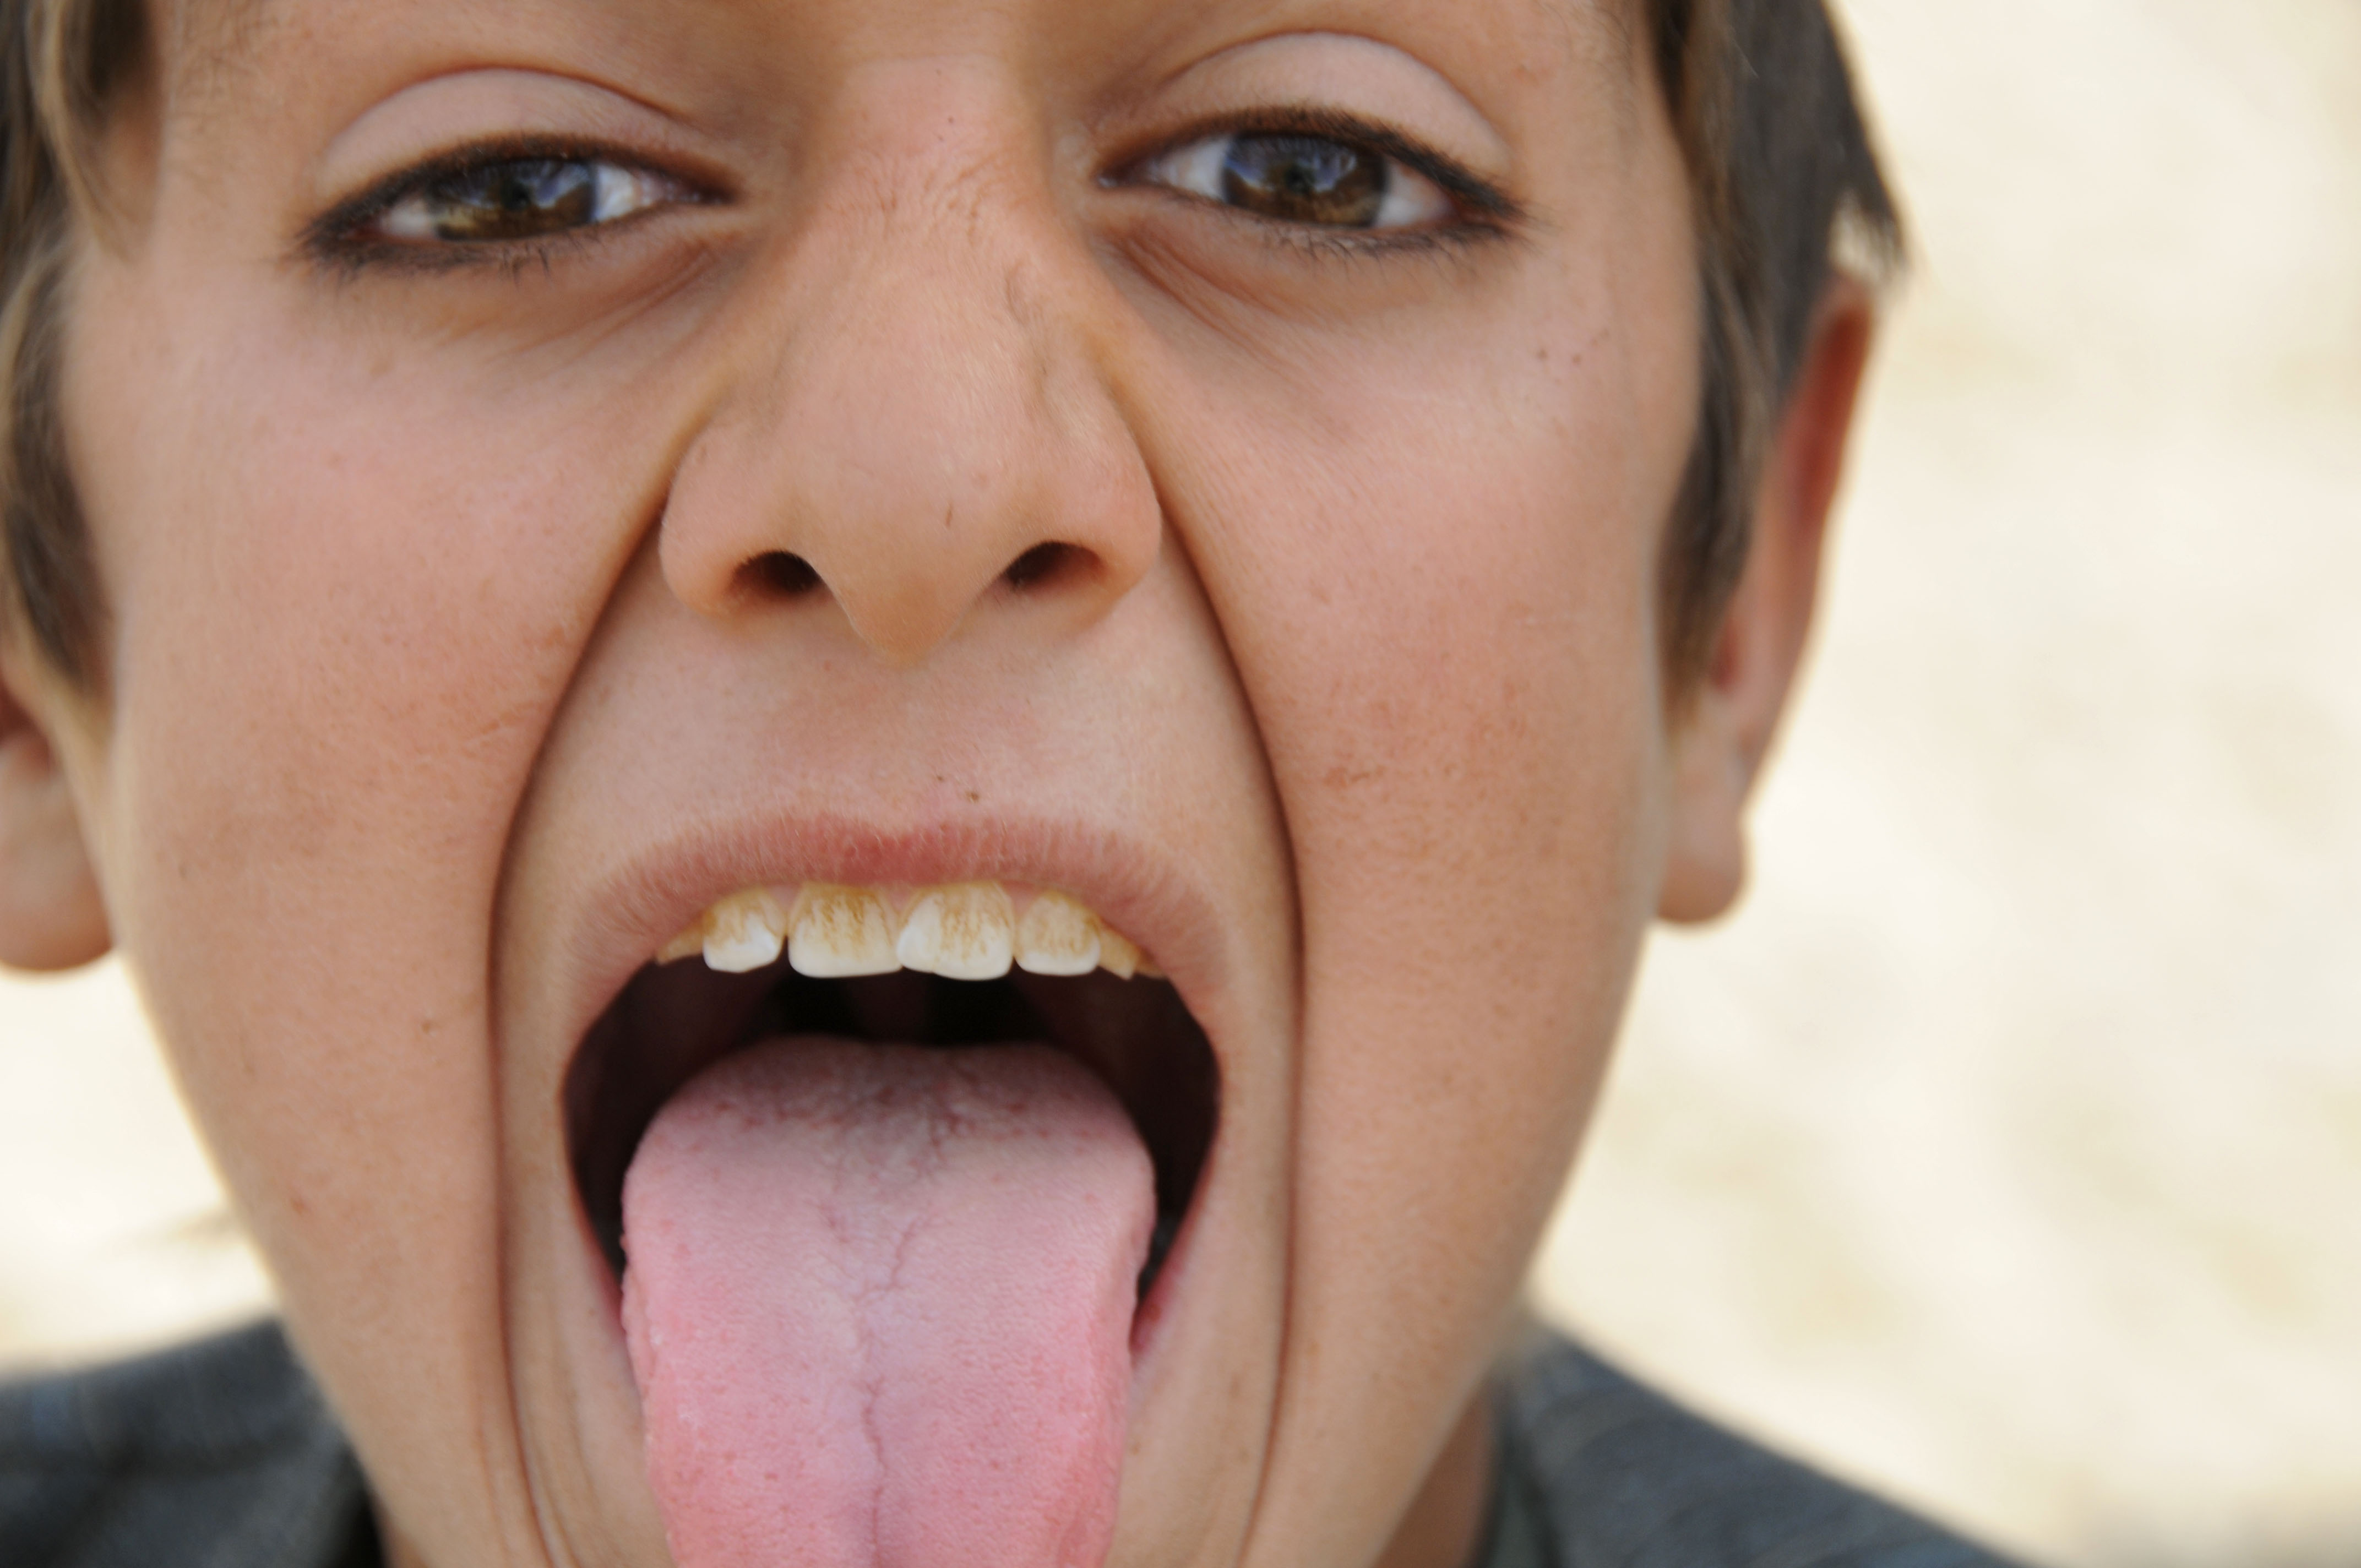 File:Funny Face (4272046693).jpg - Wikimedia Commons